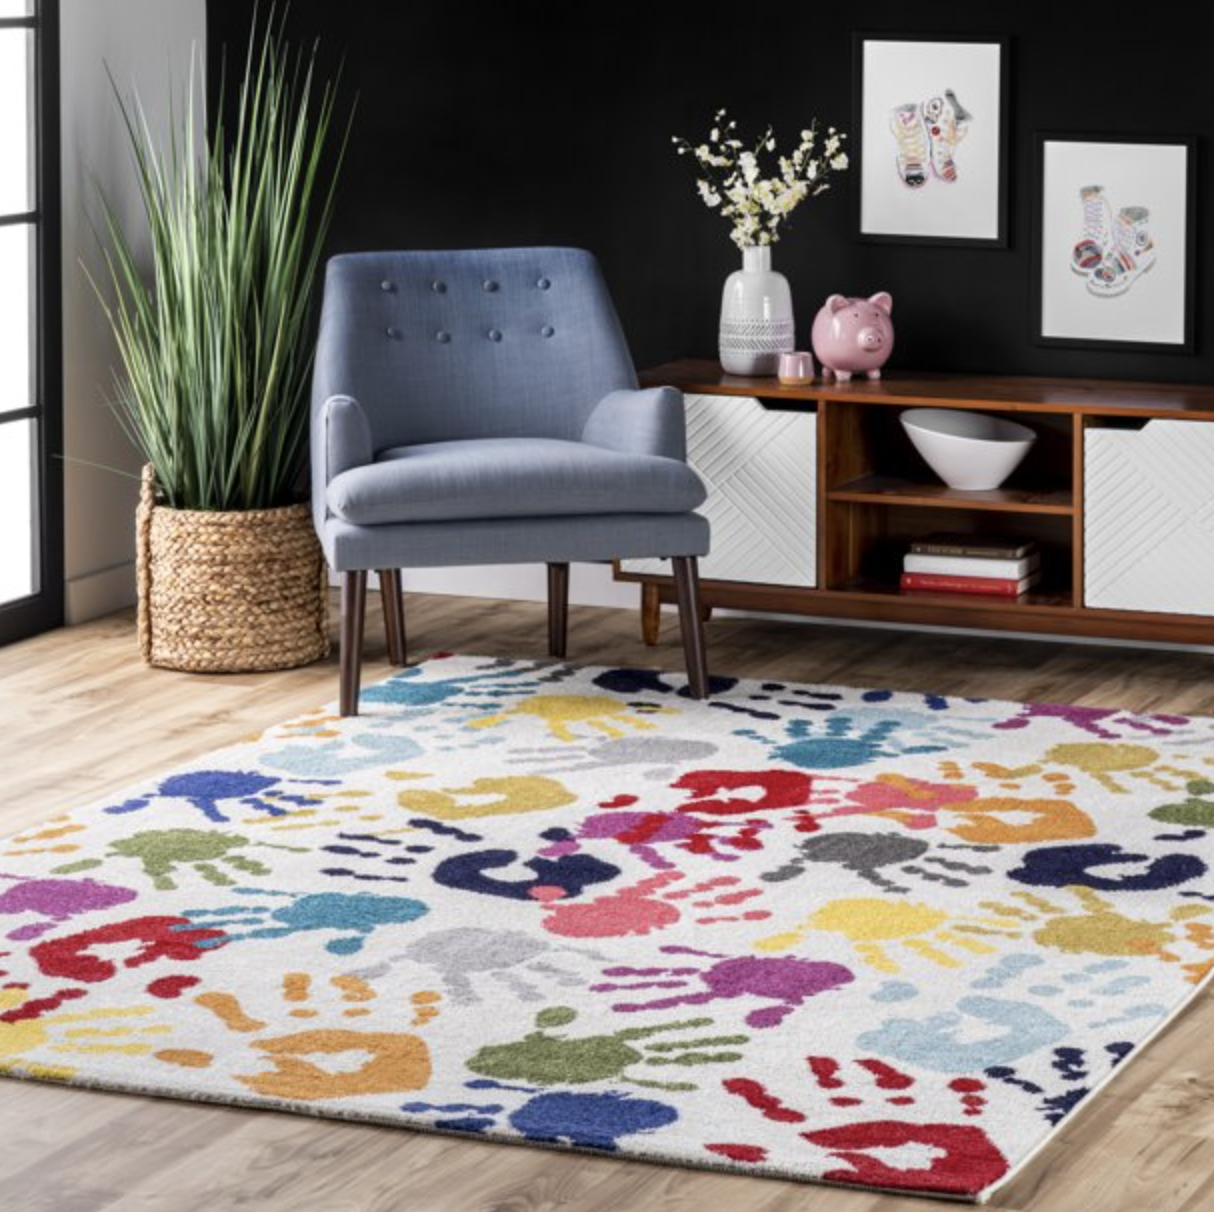 The kids area rug with colorful handprint print